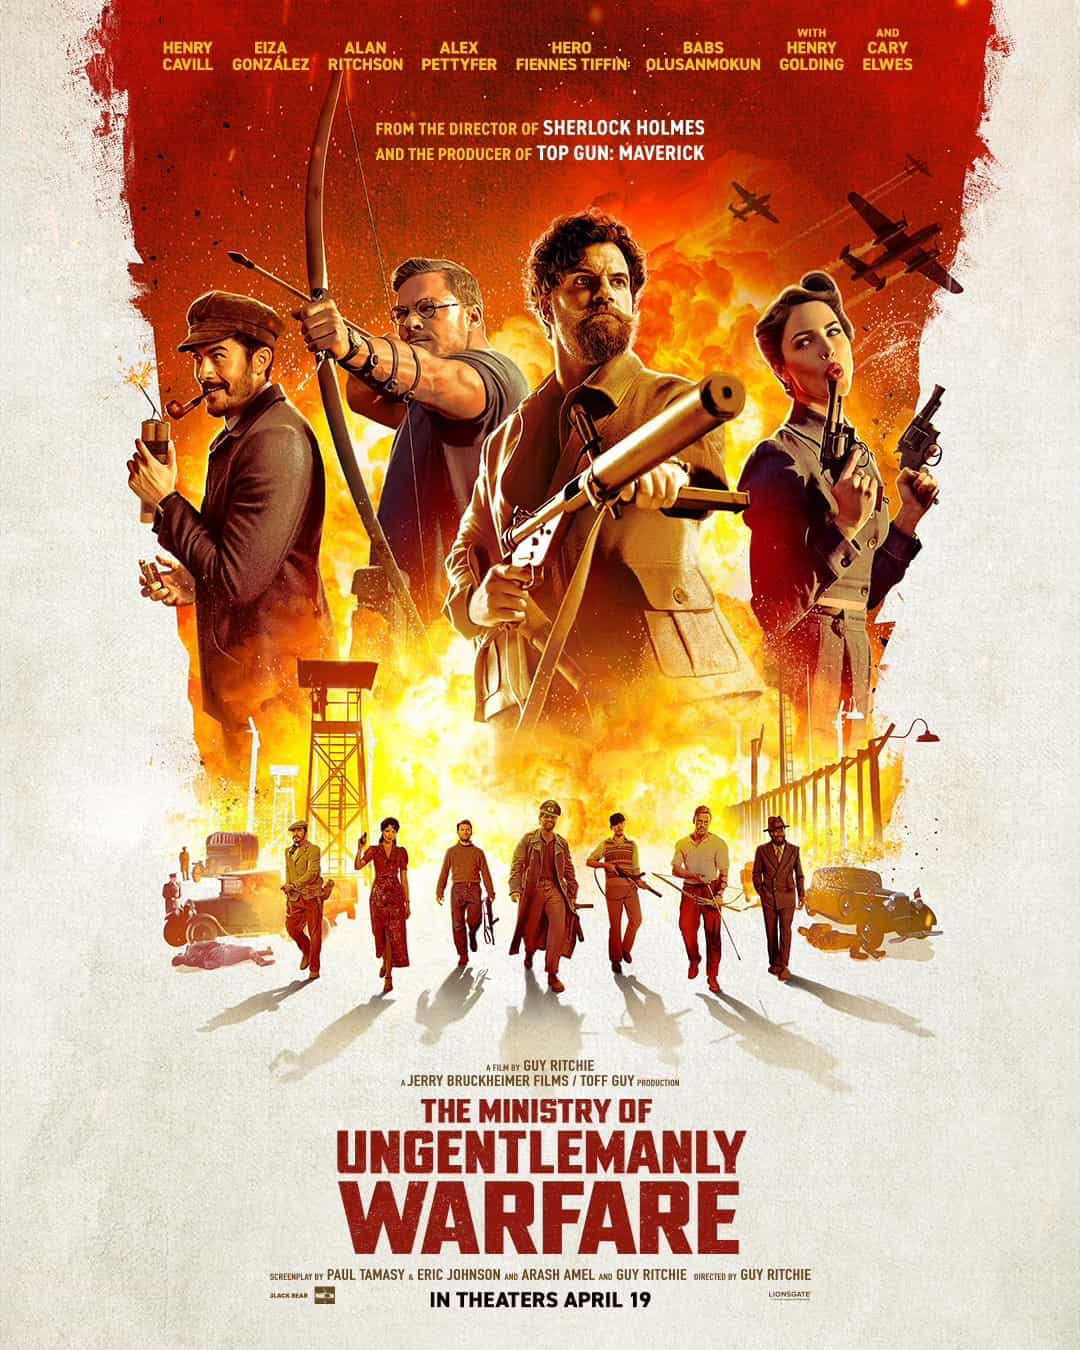 New poster has been released for The Ministry of Ungentlemanly Warfare which stars Henry Cavill and Alan Ritchson - movie UK release date 19th April 2024 #theministryofungentlemanlywarfare